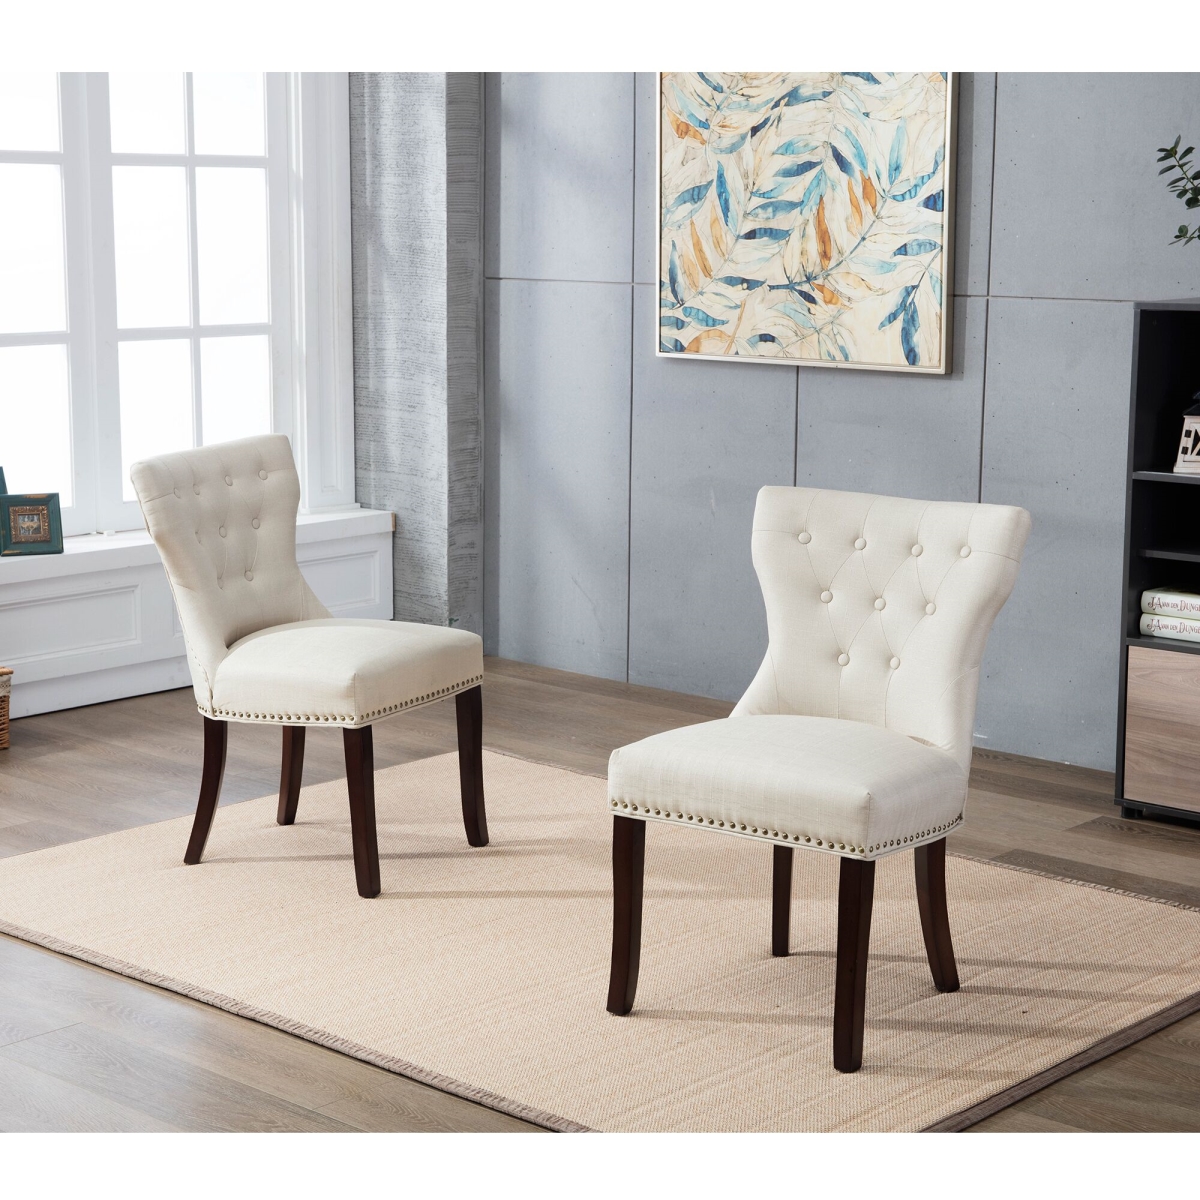 Ow-lss8097c-beige Mid Back Button-tufted Fabric Dining Side Chair, Beige - Set Of 2